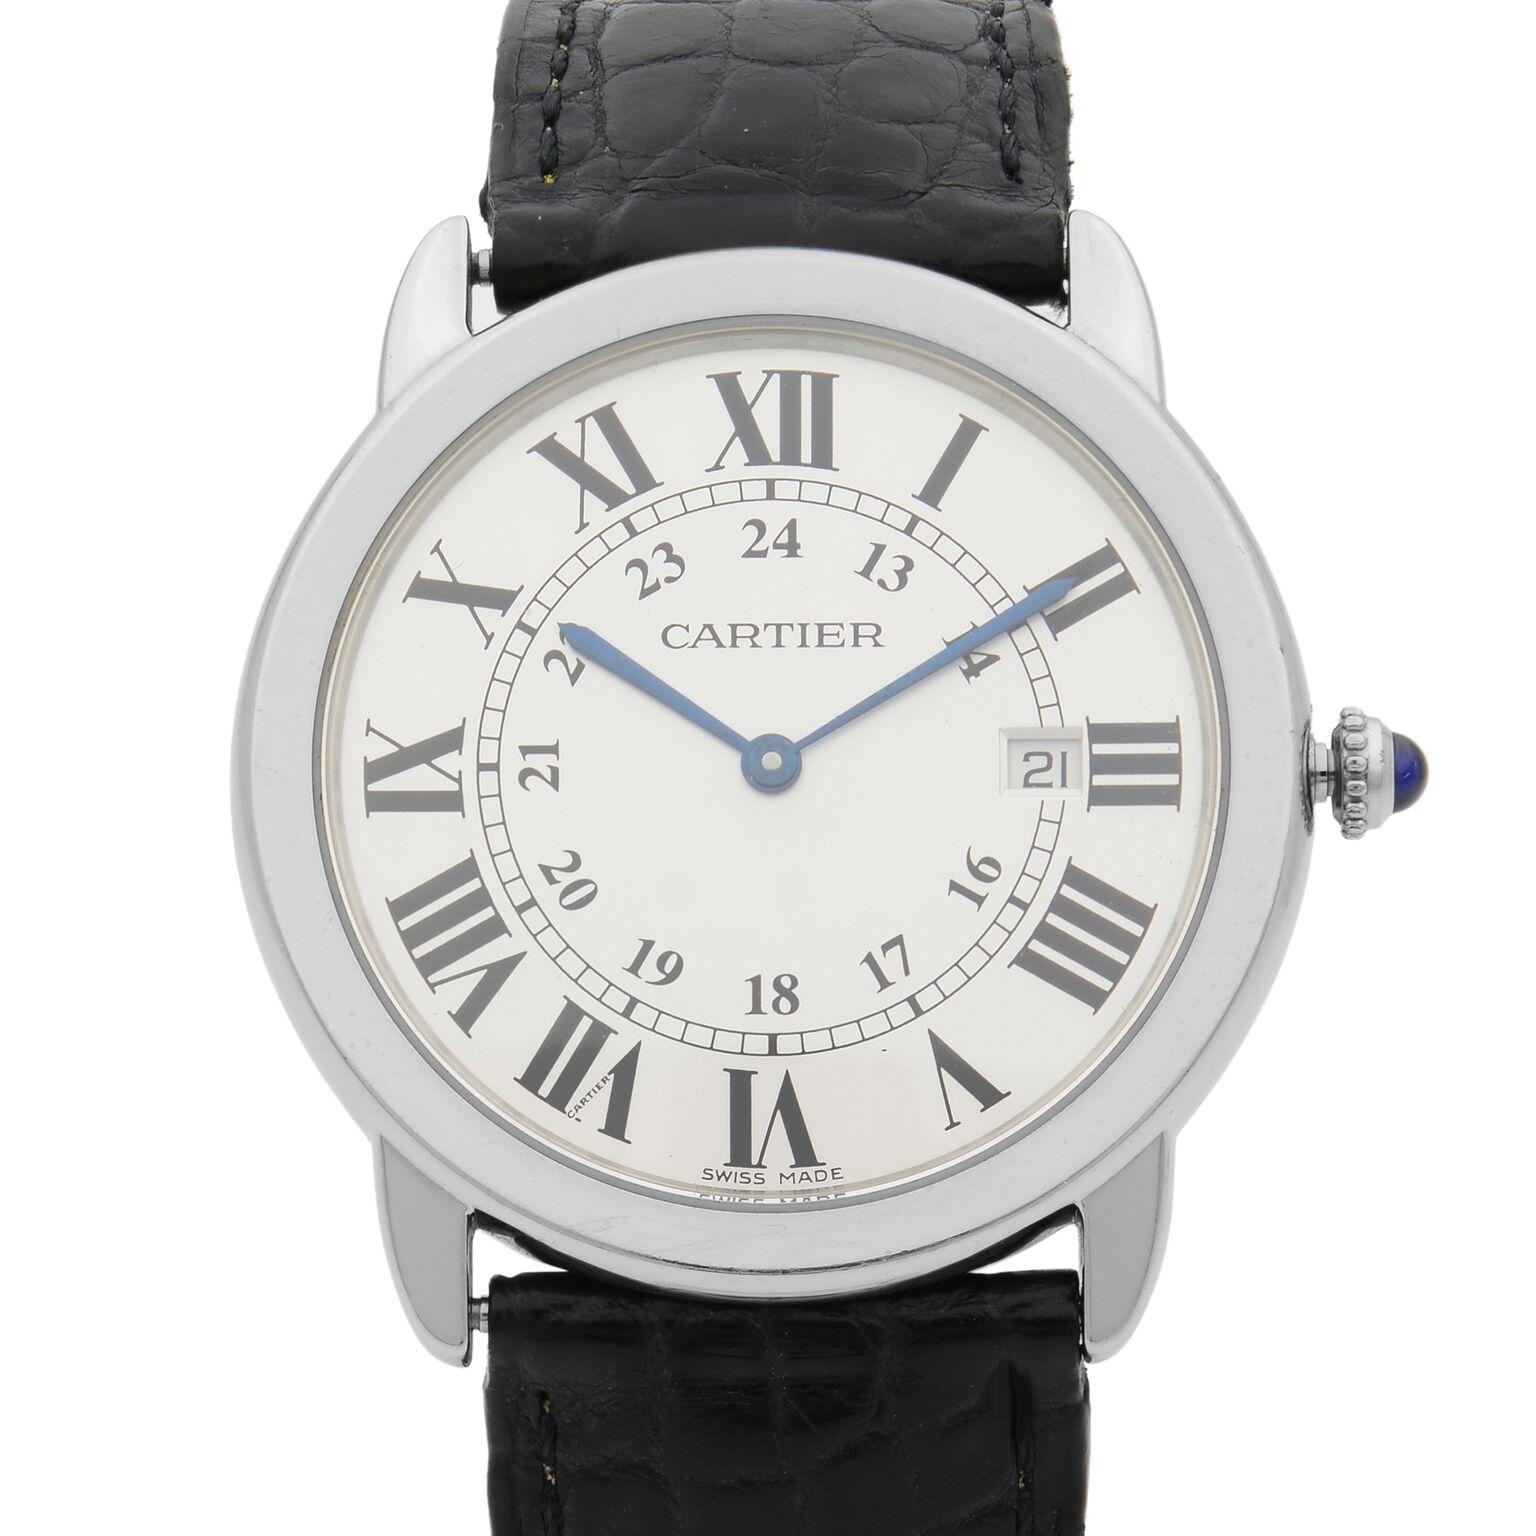 This pre-owned Cartier Ronde Solo W6700255 is a beautiful Unisex timepiece that is powered by quartz (battery) movement which is cased in a stainless steel case. It has a round shape face, date indicator dial, and has hand roman numerals style